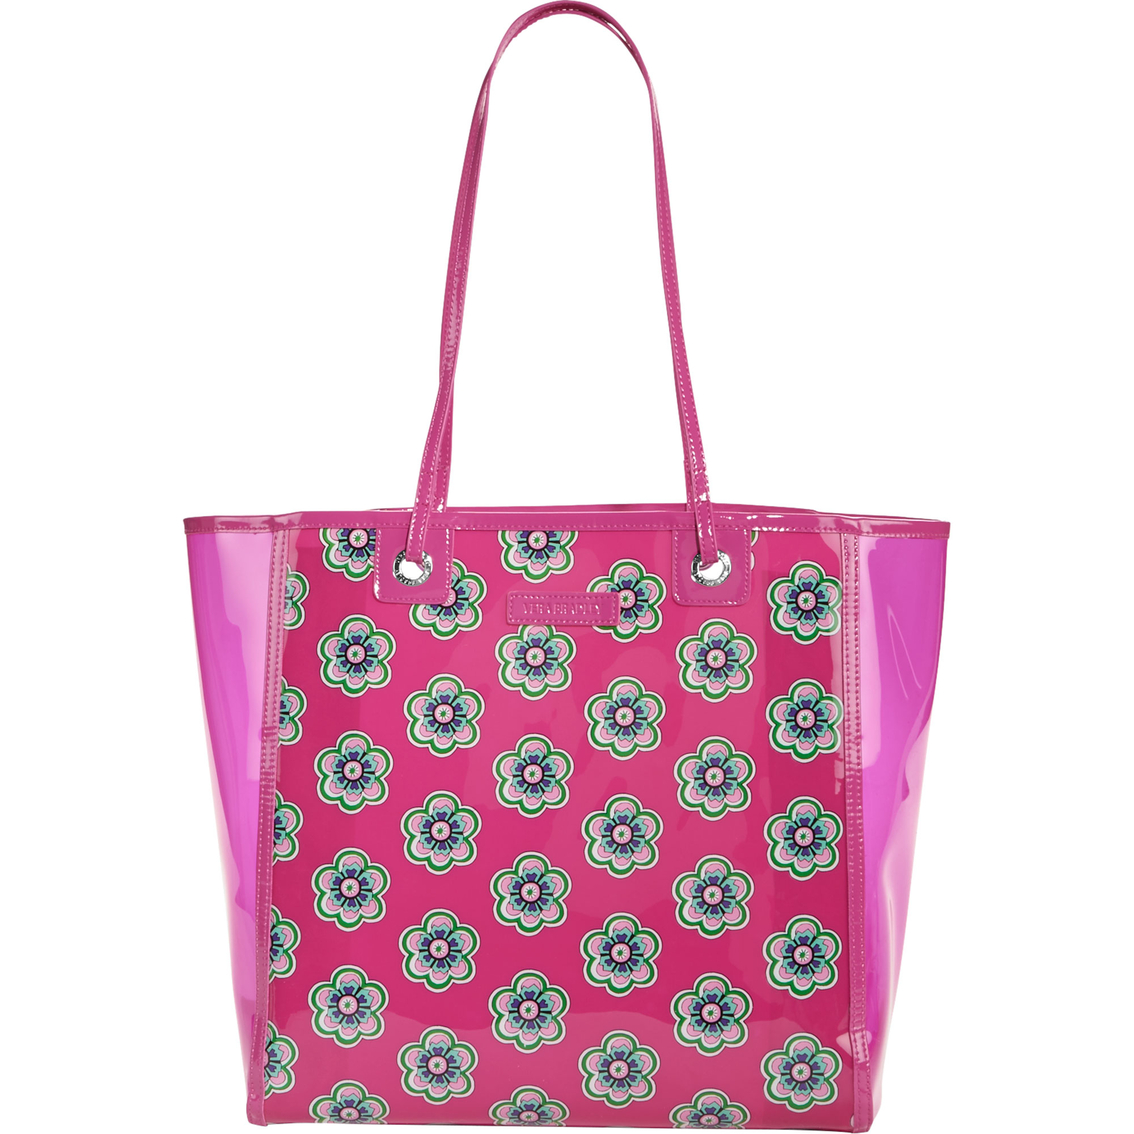 Vera Bradley Clear Colorful Tote Pink Swirls Flowers | Totes & Shoppers ...